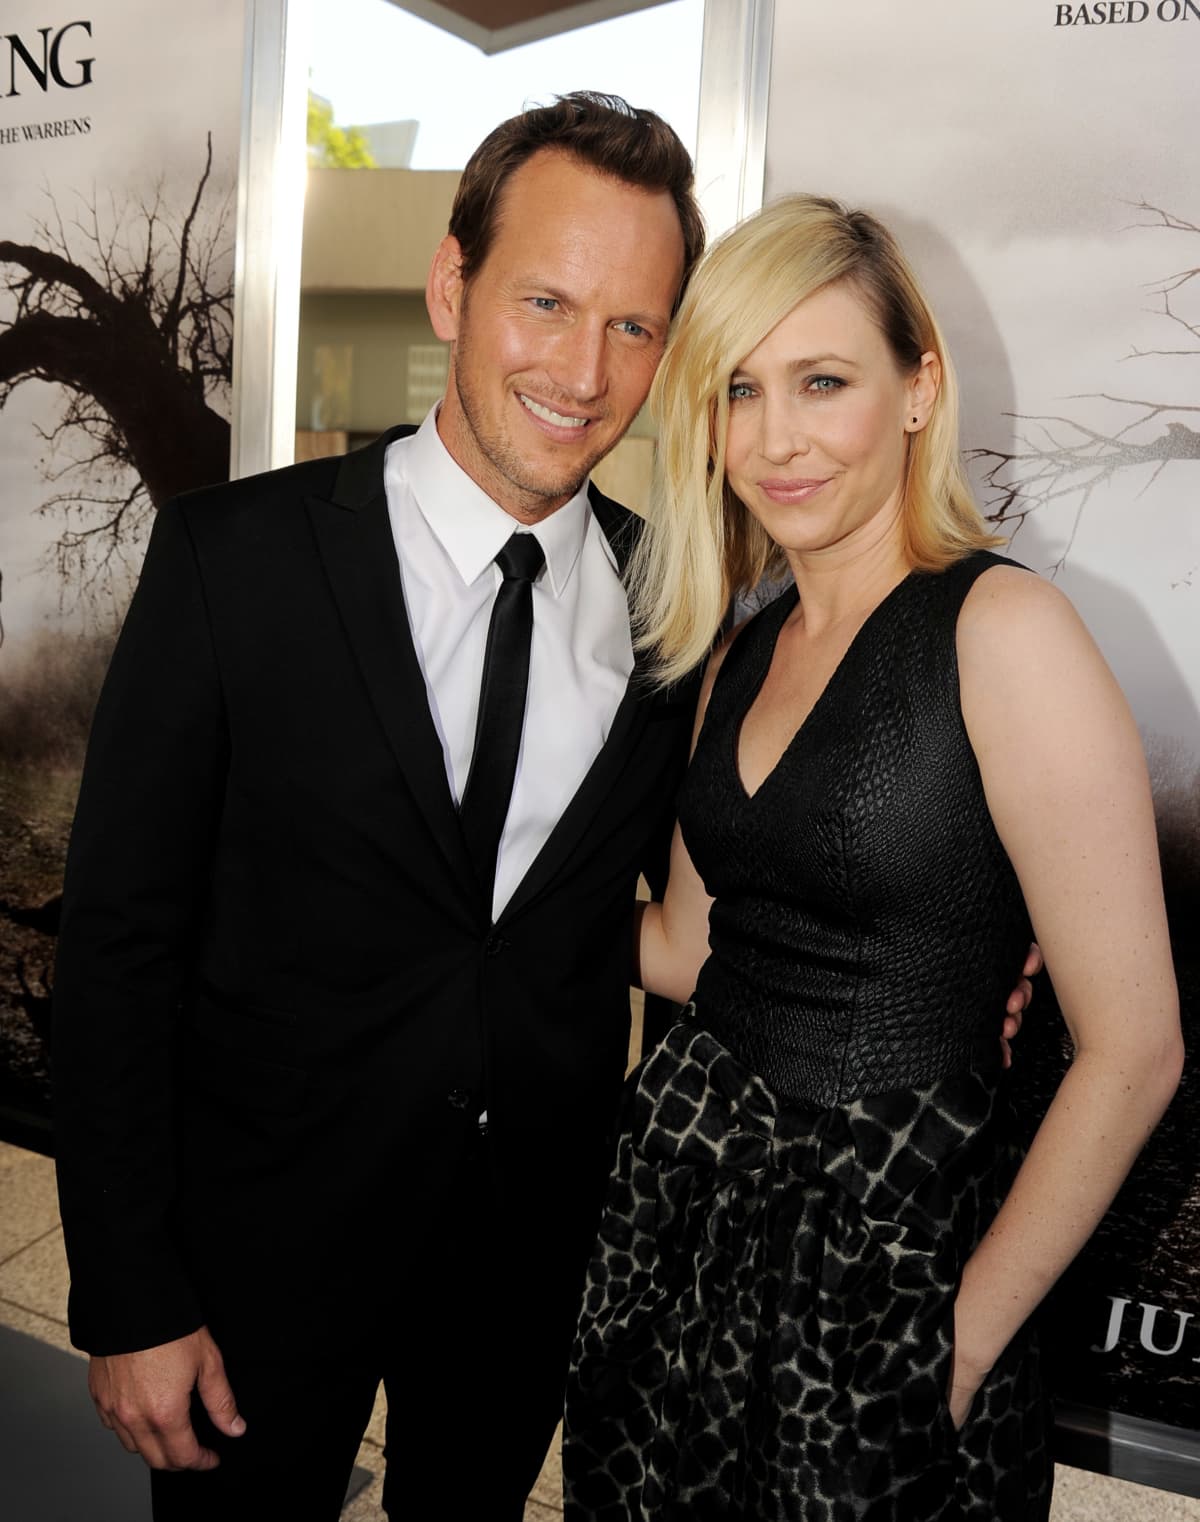 LOS ANGELES, CA - JULY 15:  Actors Patrick Wilson (L) and Vera Farmiga arrive at the premiere of Warner Bros. "The Conjuring" at the Cinerama Dome on July 15, 2013 in Los Angeles, California.  (Photo by Kevin Winter/Getty Images)